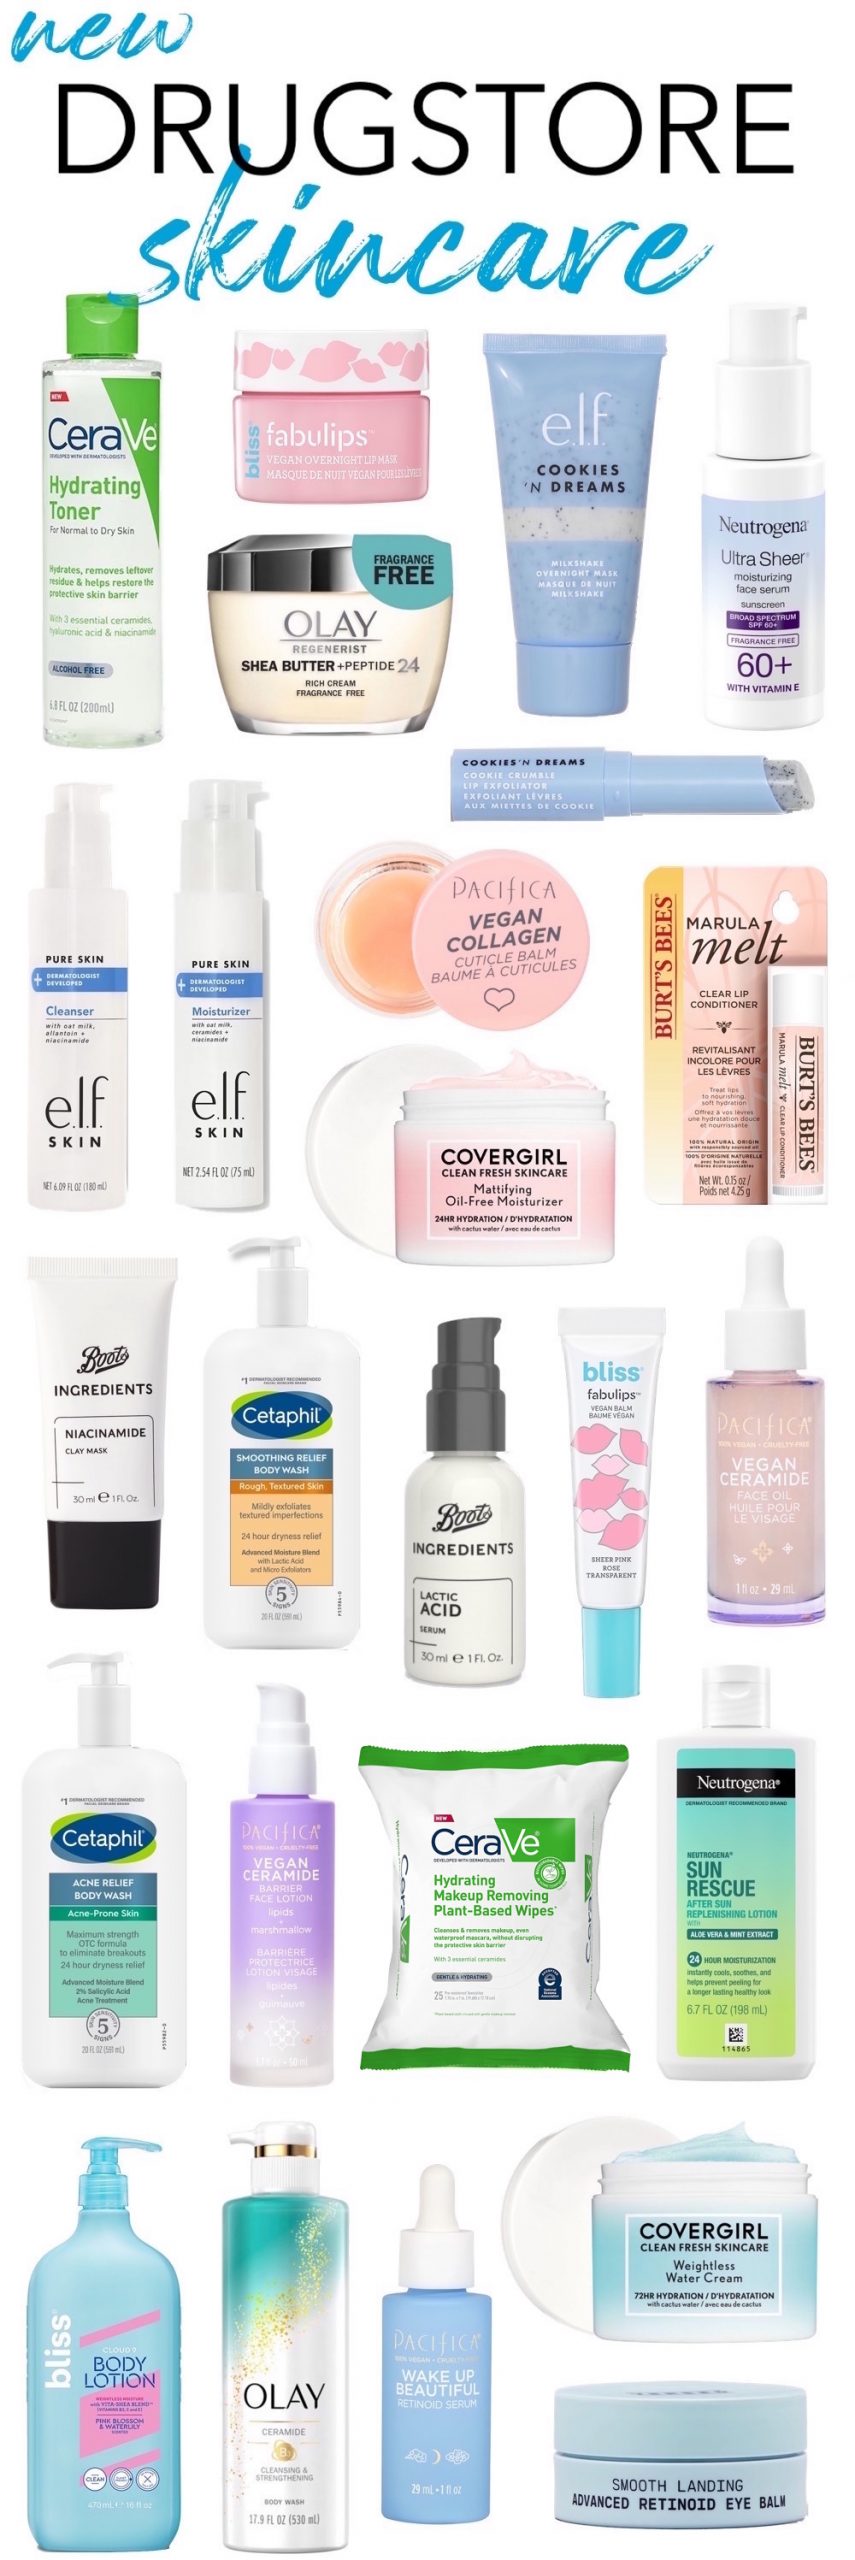 27 New Drugstore Skincare Picks You Won’t Want to Miss!